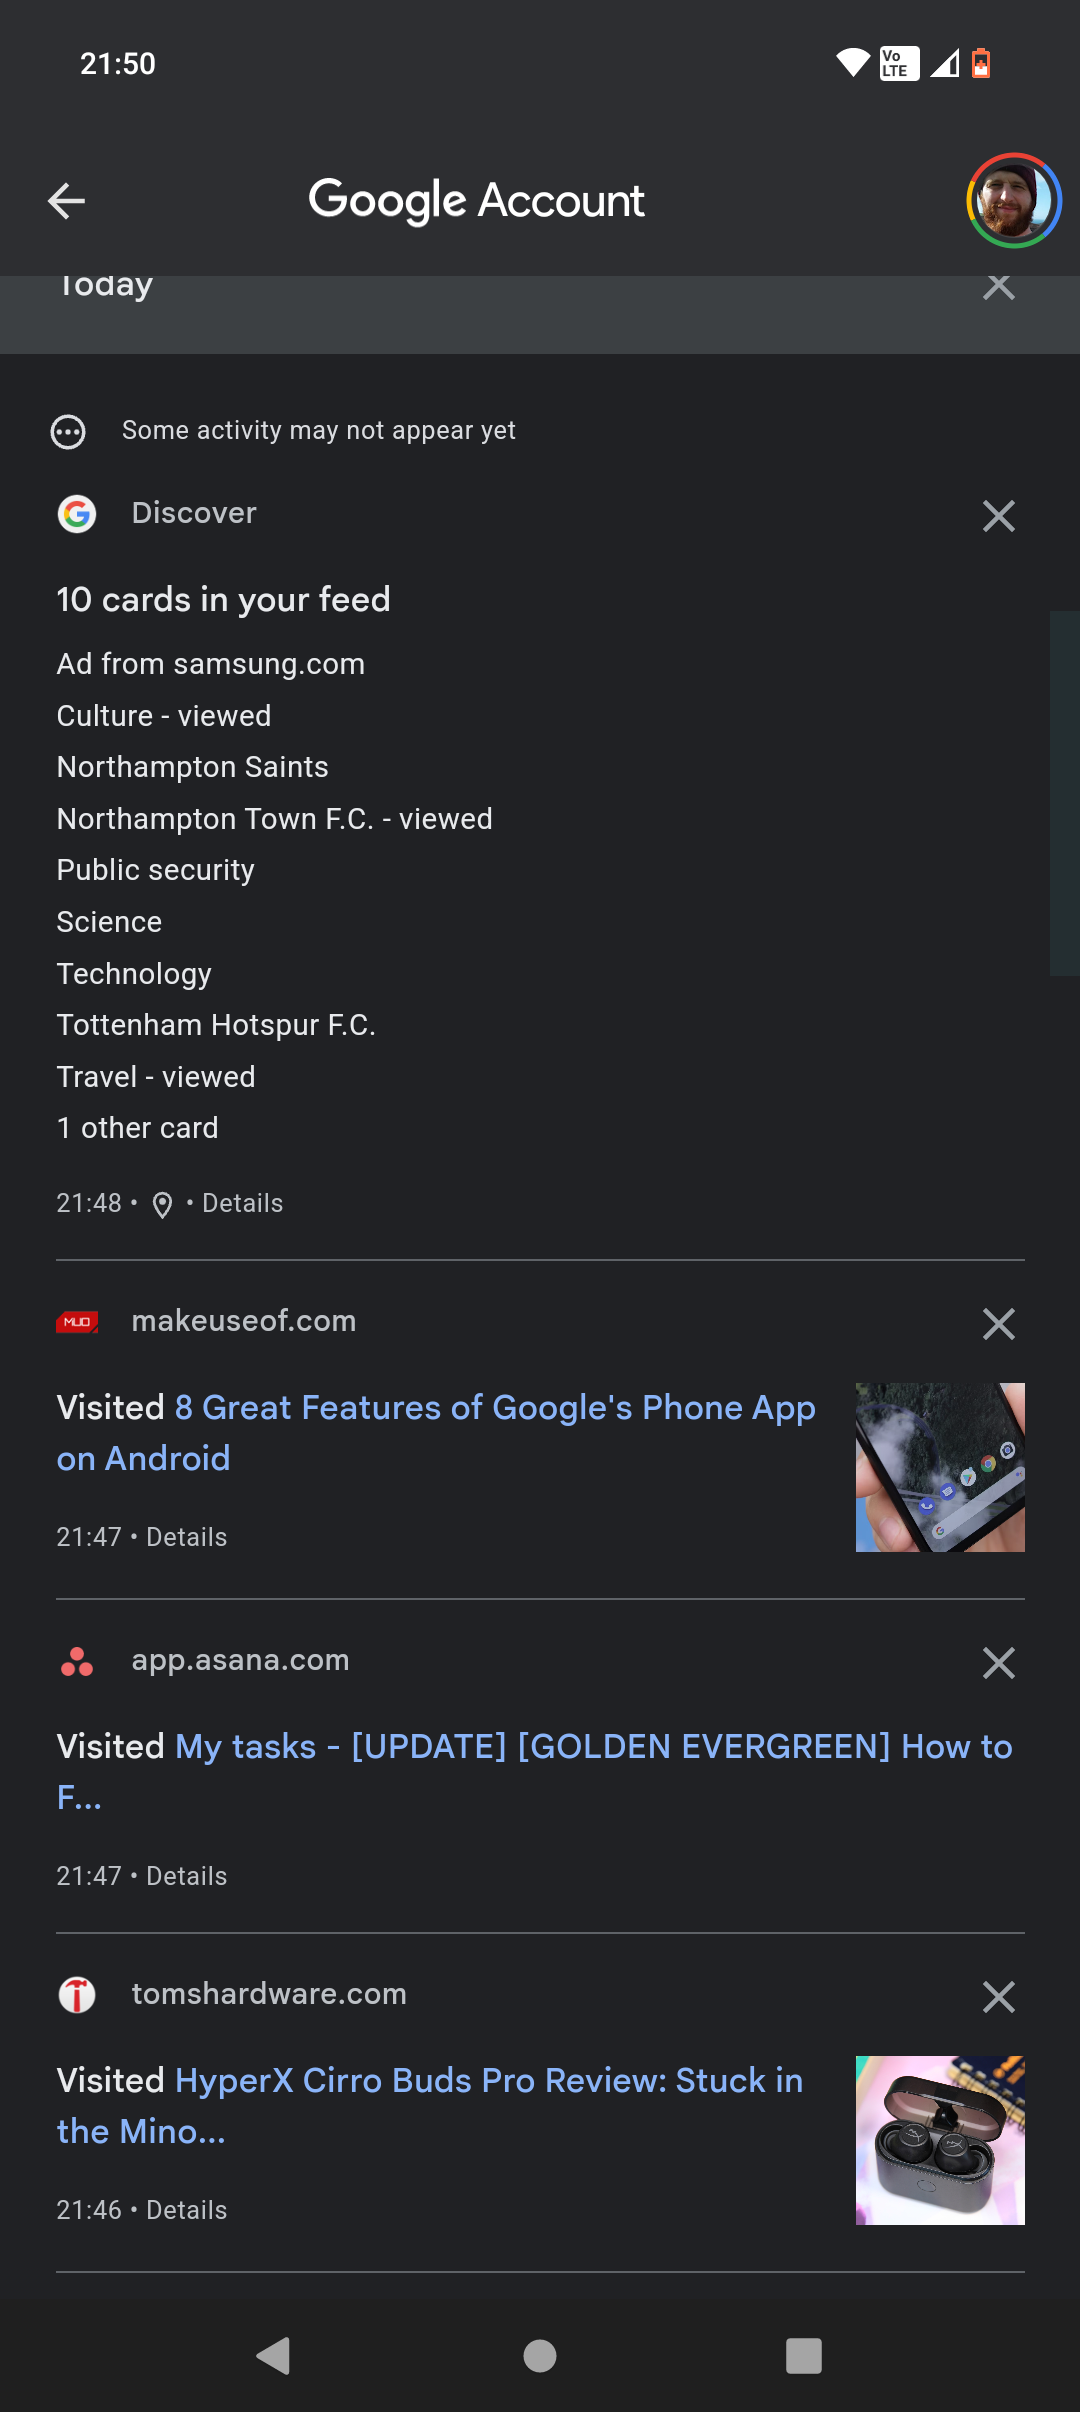 google android app cards and settings